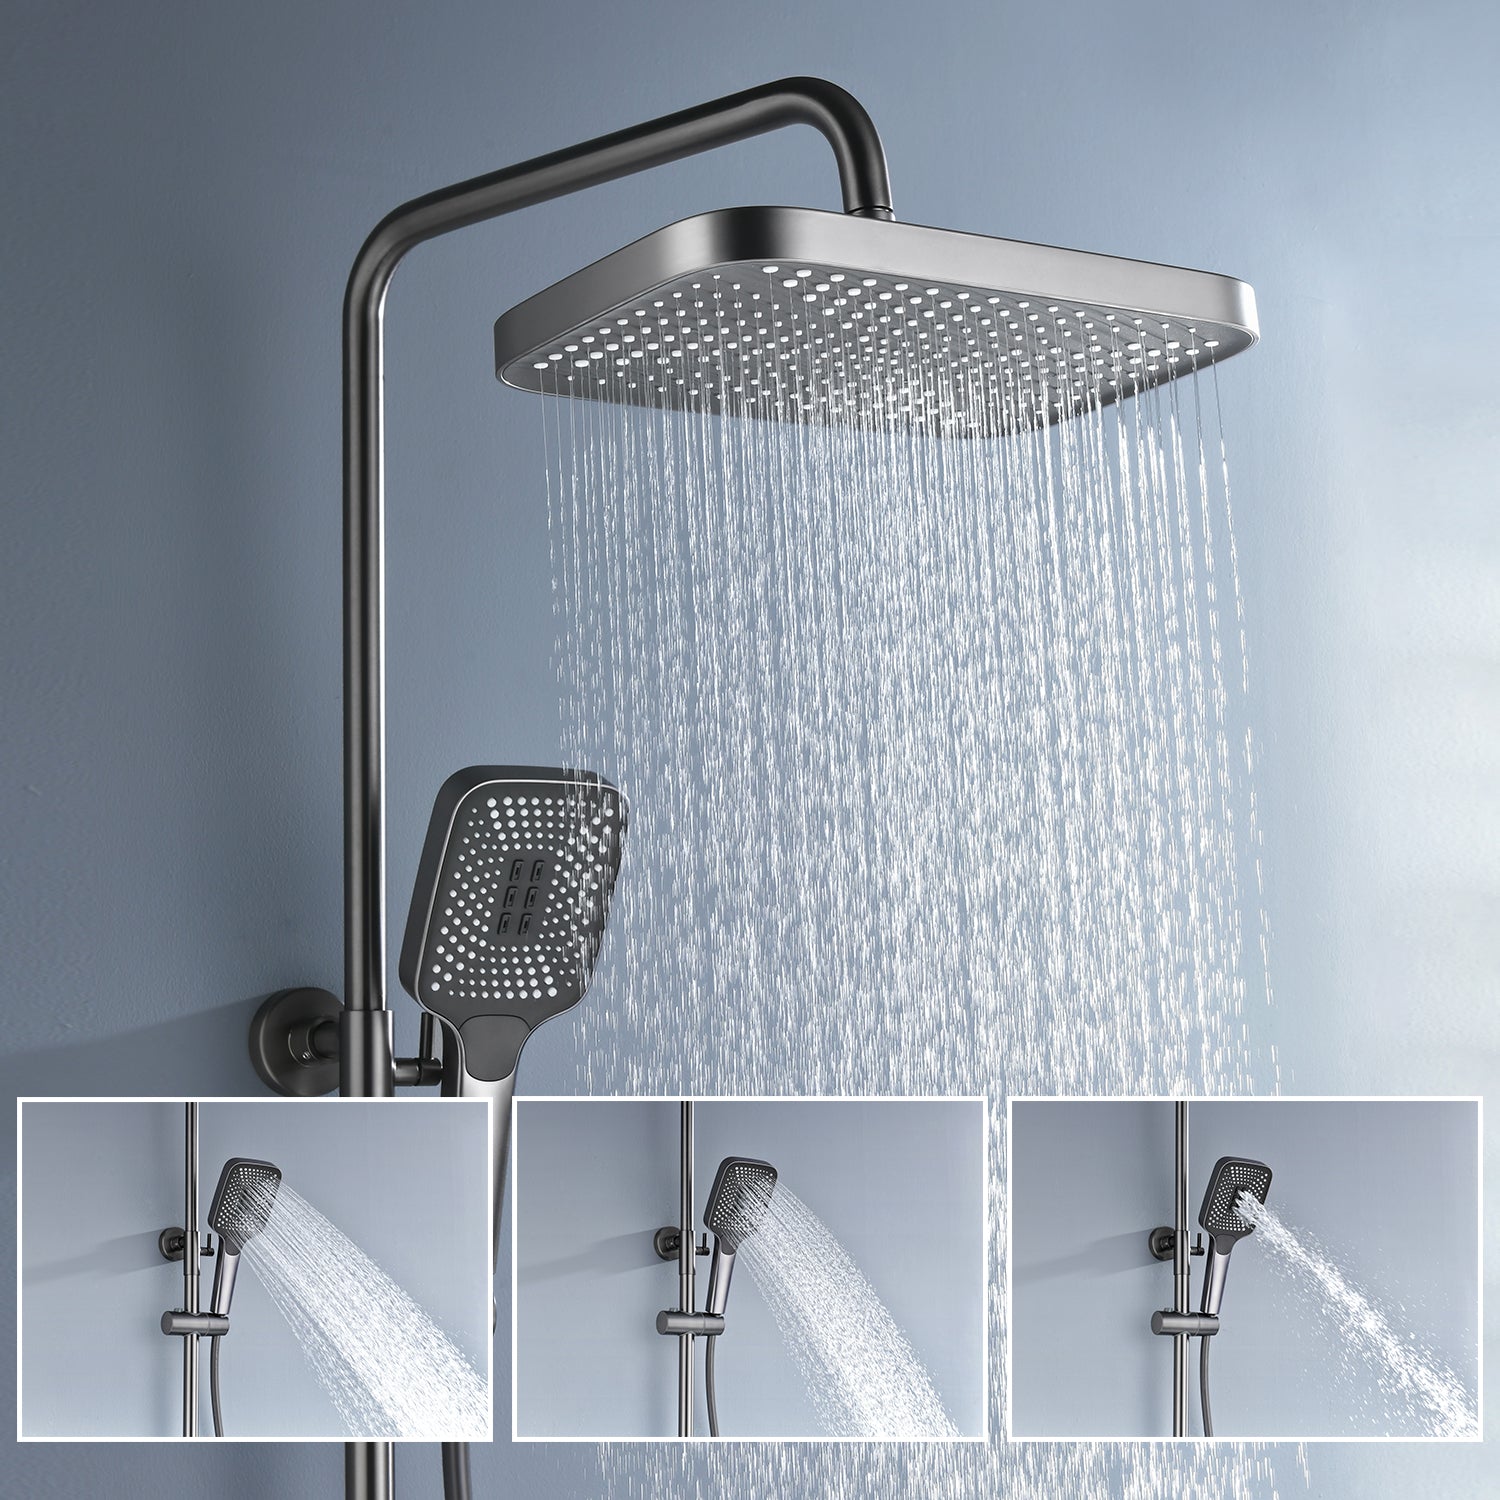 Lefton Thermostatic Shower System with Temperature Display and 4 Water Outlet Modes-SST2205